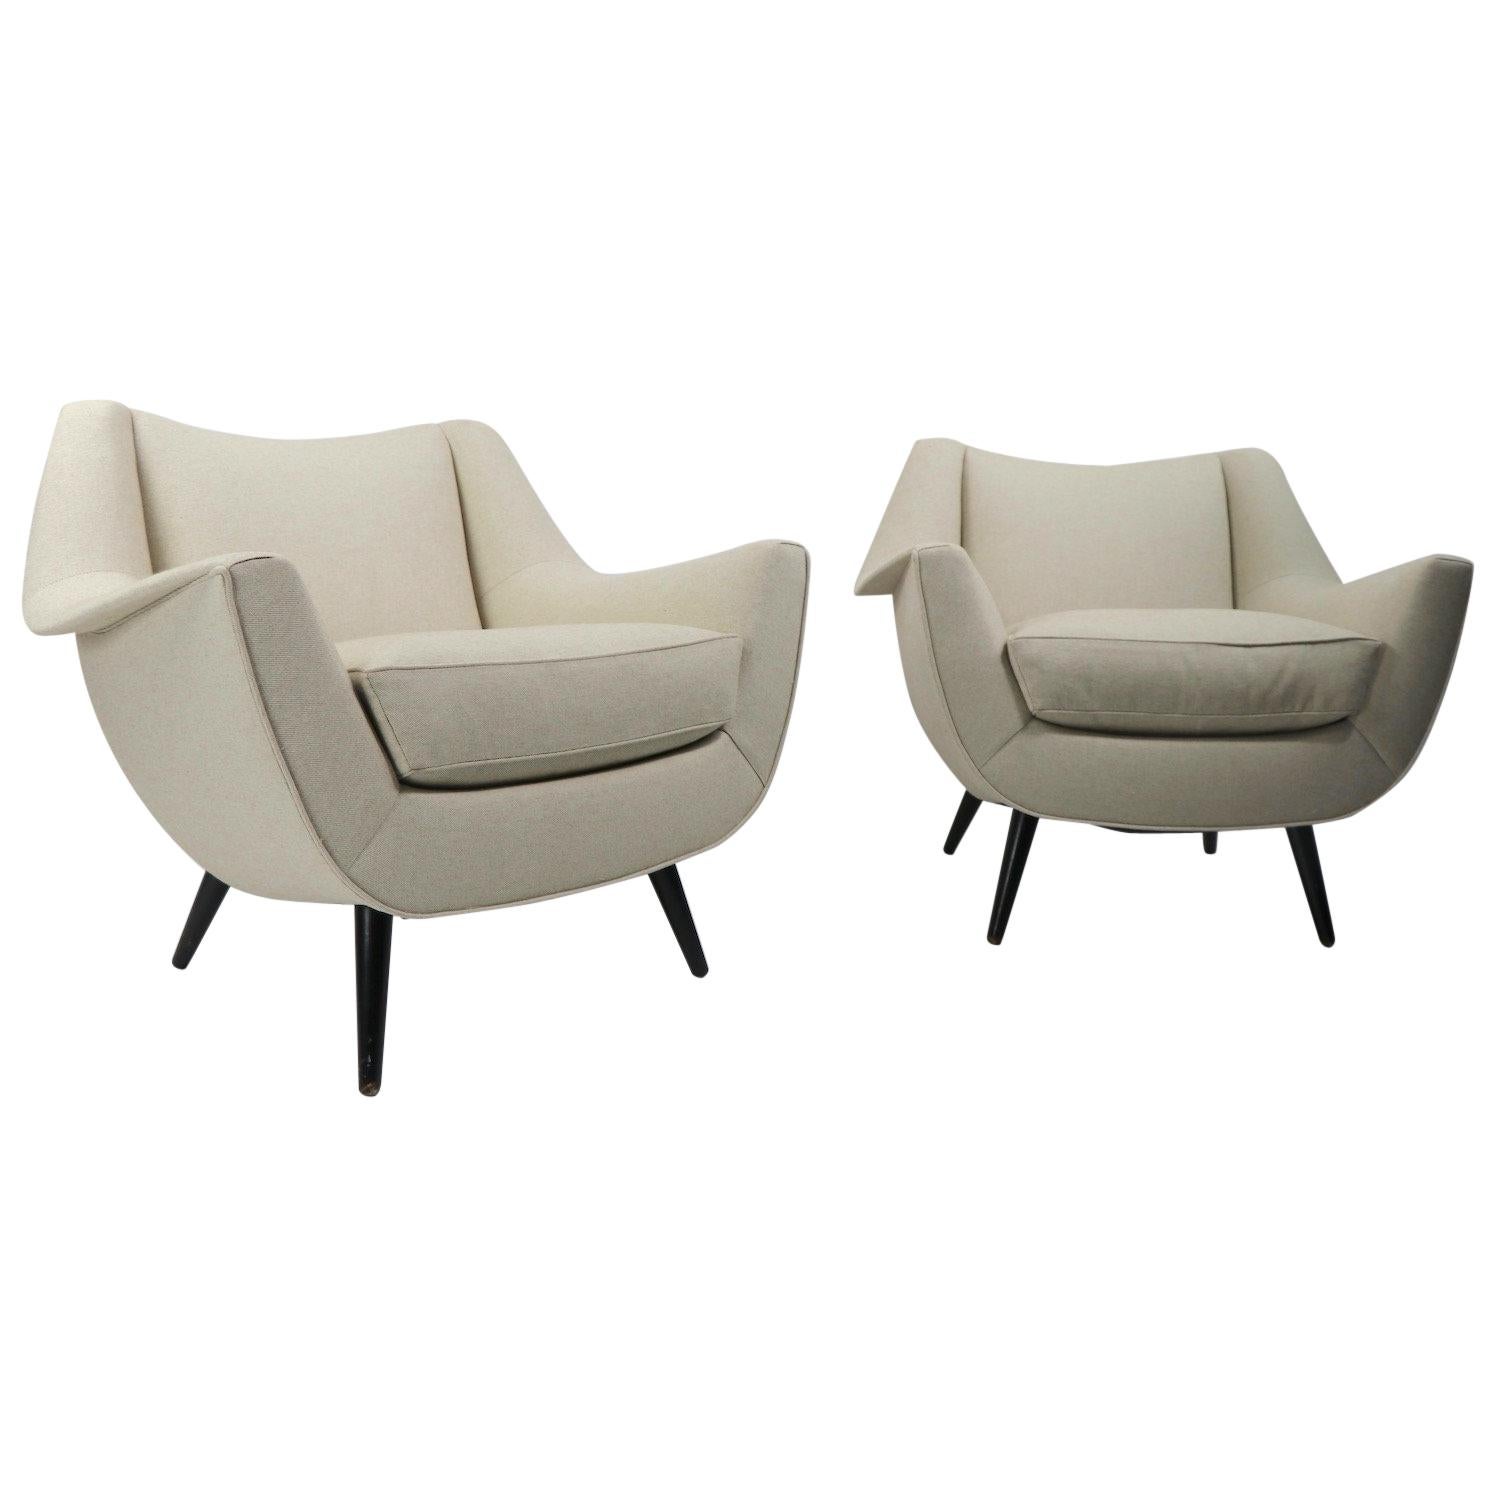 Pair of Oversized Lounge Chairs by Lawrence Peabody for Selig